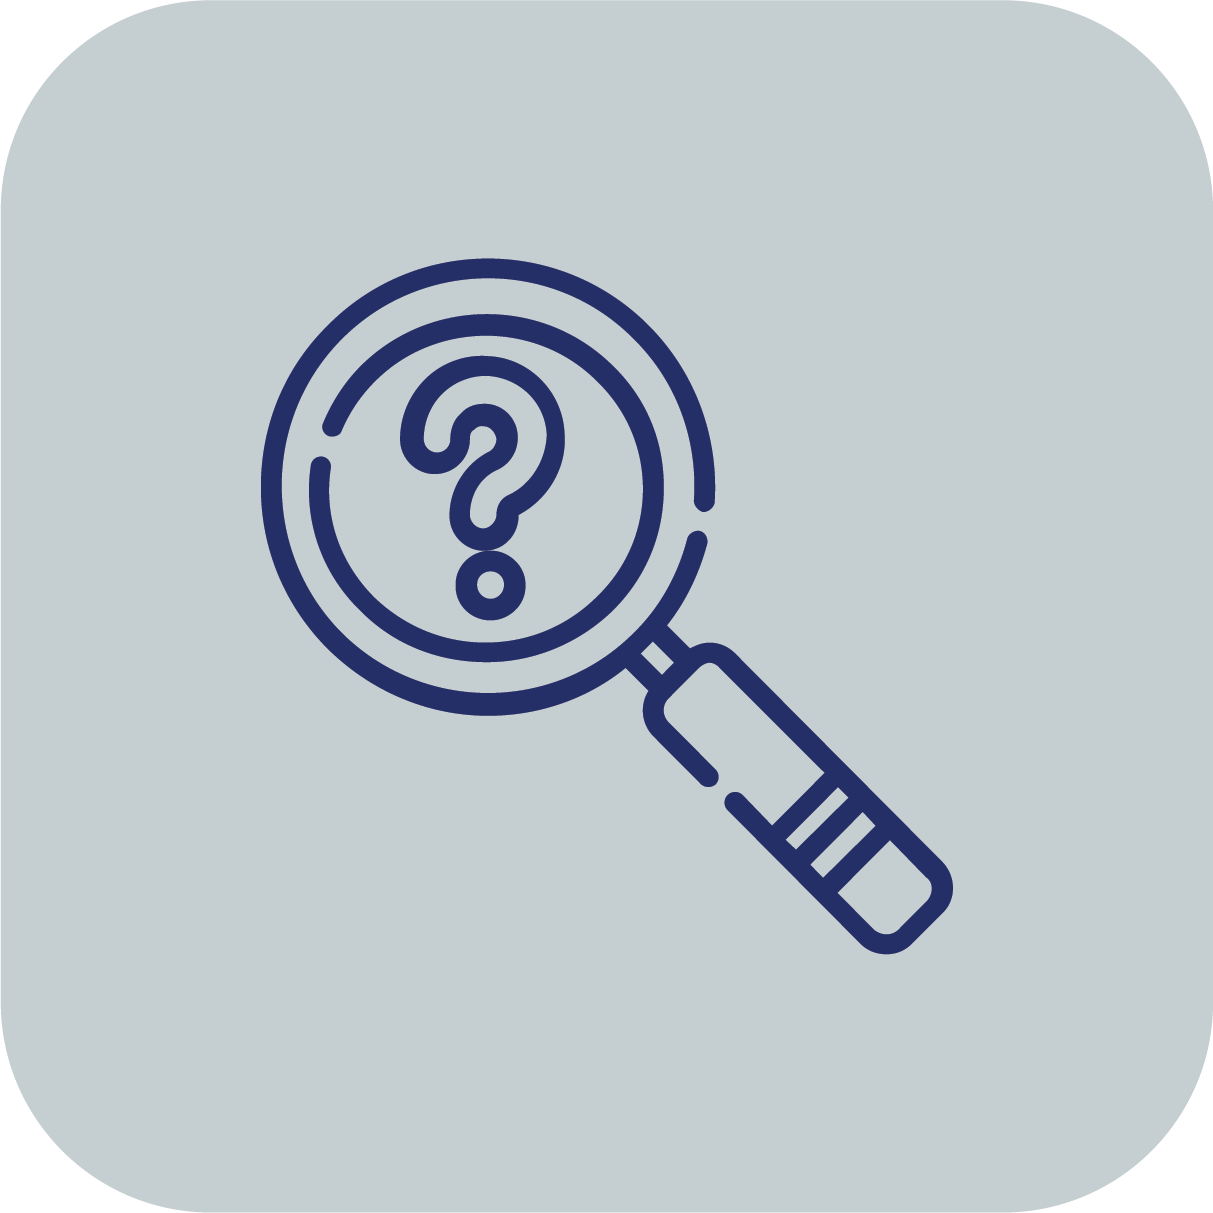 Button to access Due Diligence service page. Icon shows a magnifying glass with a question mark inside the lens.